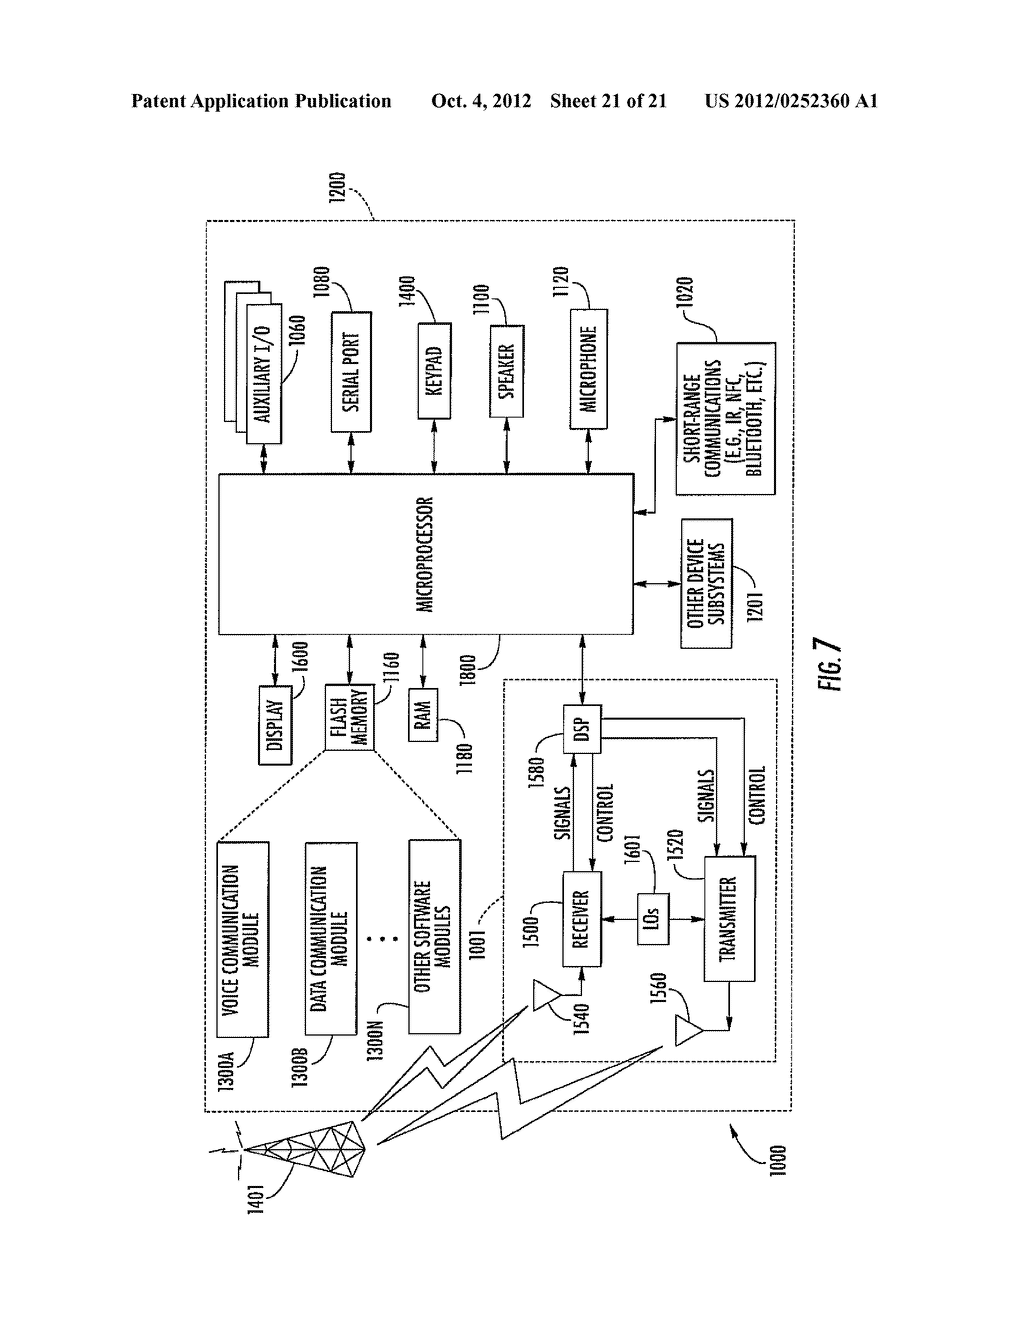 MOBILE WIRELESS COMMUNICATIONS DEVICE FOR SELECTING A PAYMENT ACCOUNT TO     USE WITH A PAYMENT PROCESSING SYSTEM BASED UPON A MICROPHONE OR DEVICE     PROFILE AND ASSOCIATED METHODS - diagram, schematic, and image 22